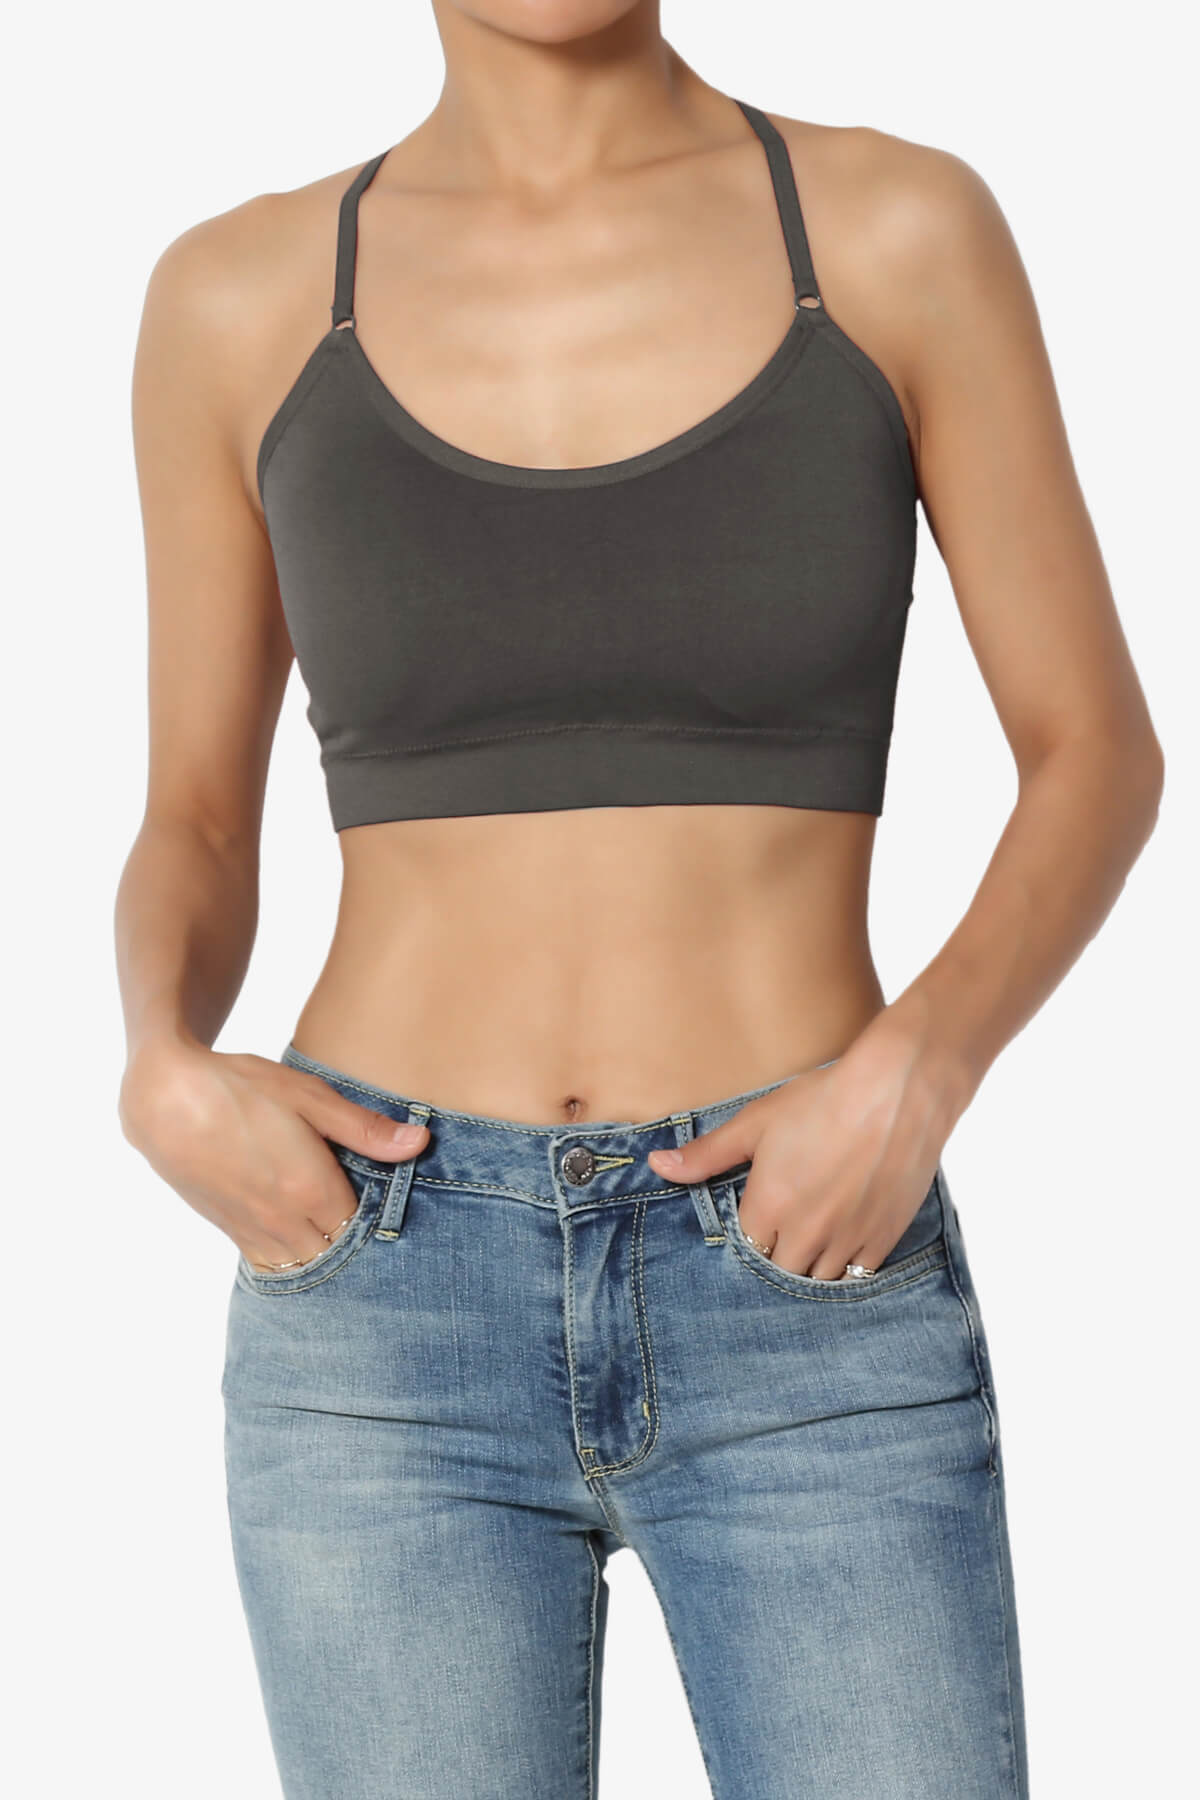 Load image into Gallery viewer, Dassie Padded Cross Back Bra Top ASH GREY_1
